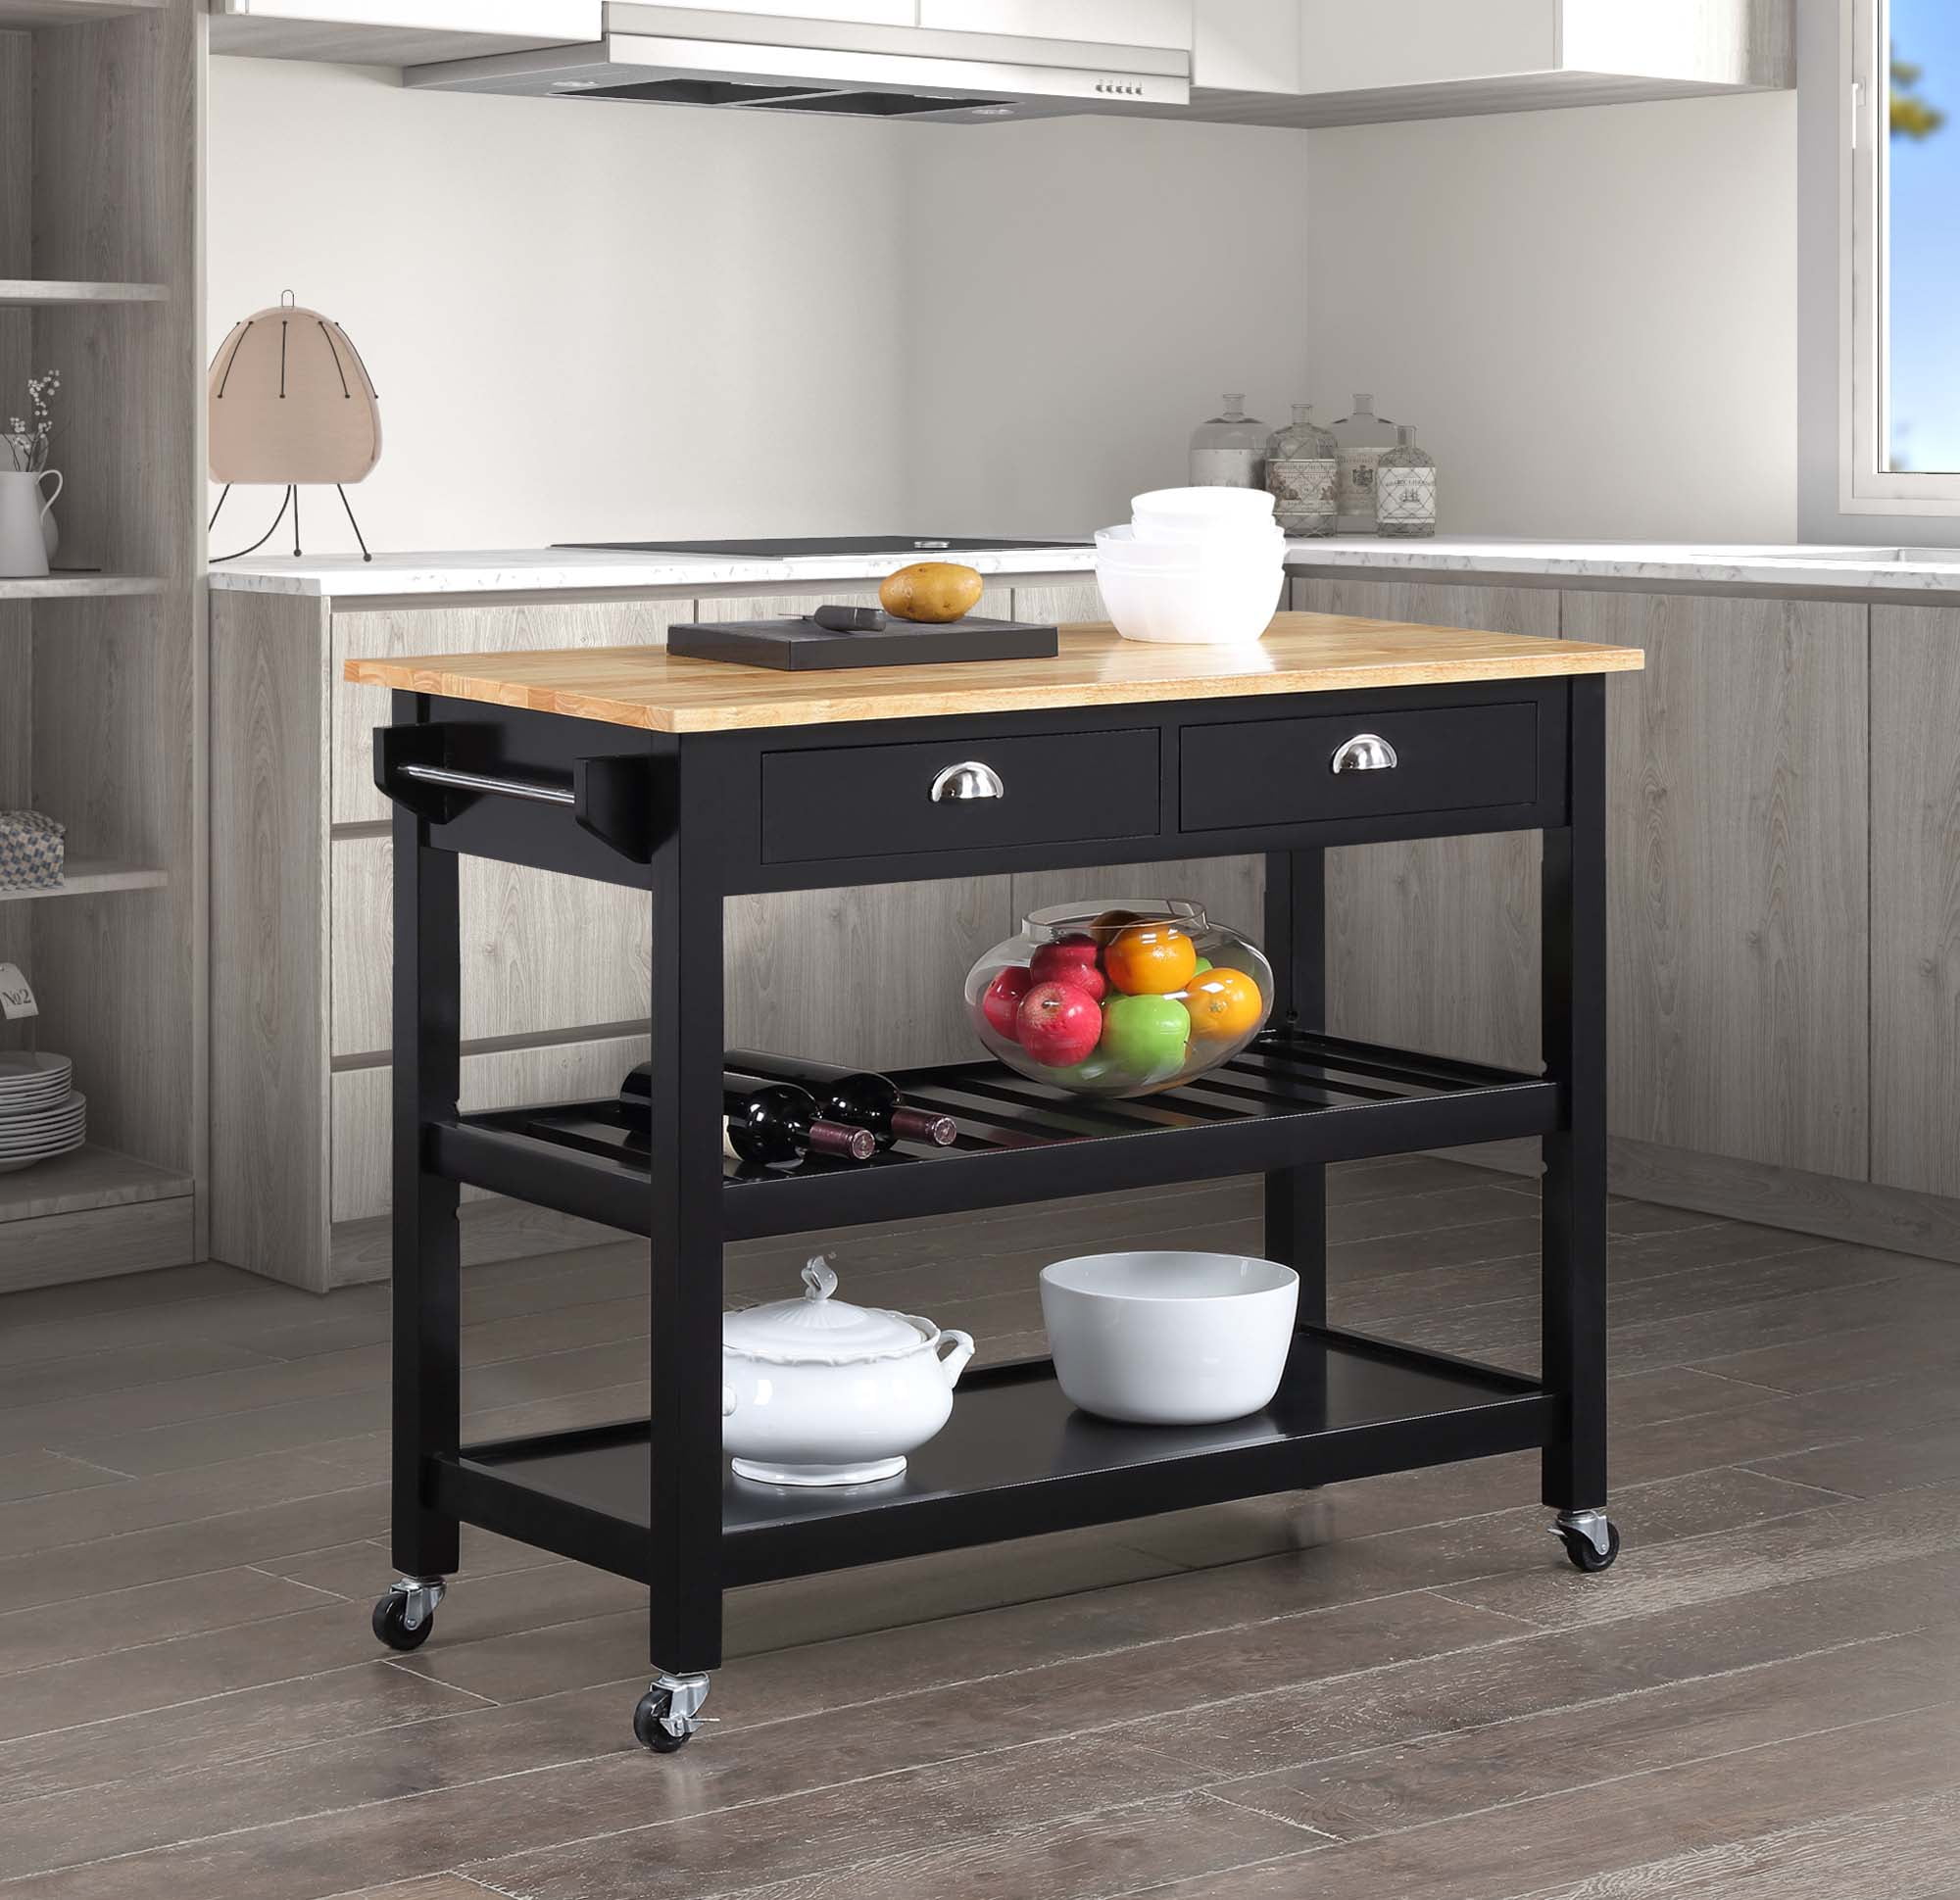 Picture of Convenience Concepts 802215BBBL American Heritage 3 Tier Butcher Block Kitchen Cart with Drawers - Butcher Block/Black